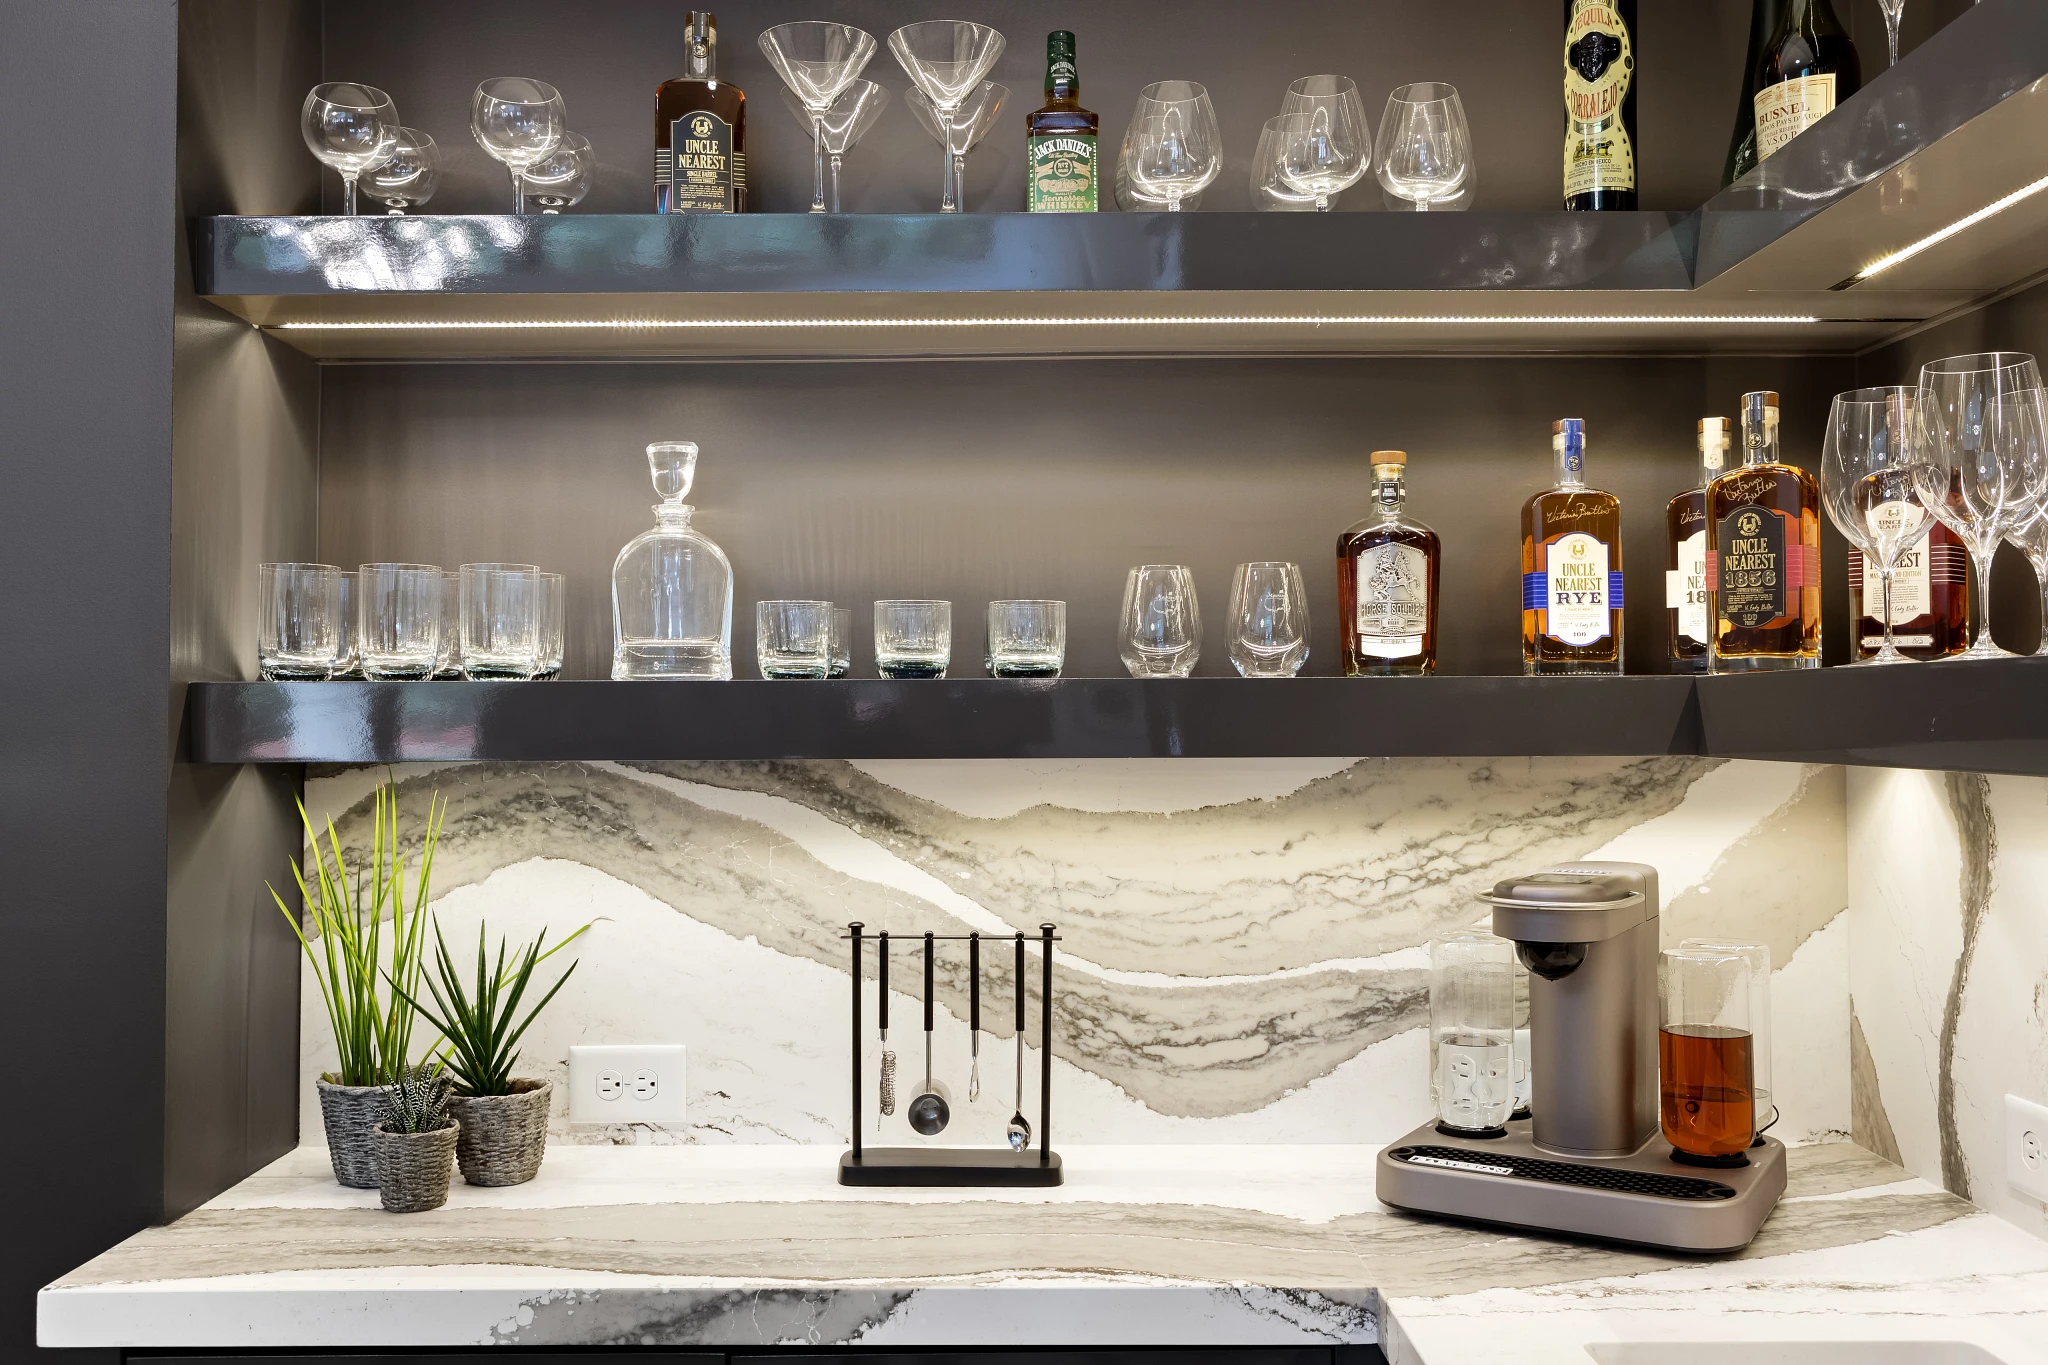 a wet bar with quartz countertops and backsplash, black cabinets, black shelving with LED under-lighting, a coffee machine, and various alcoholic beverages on the shelves.